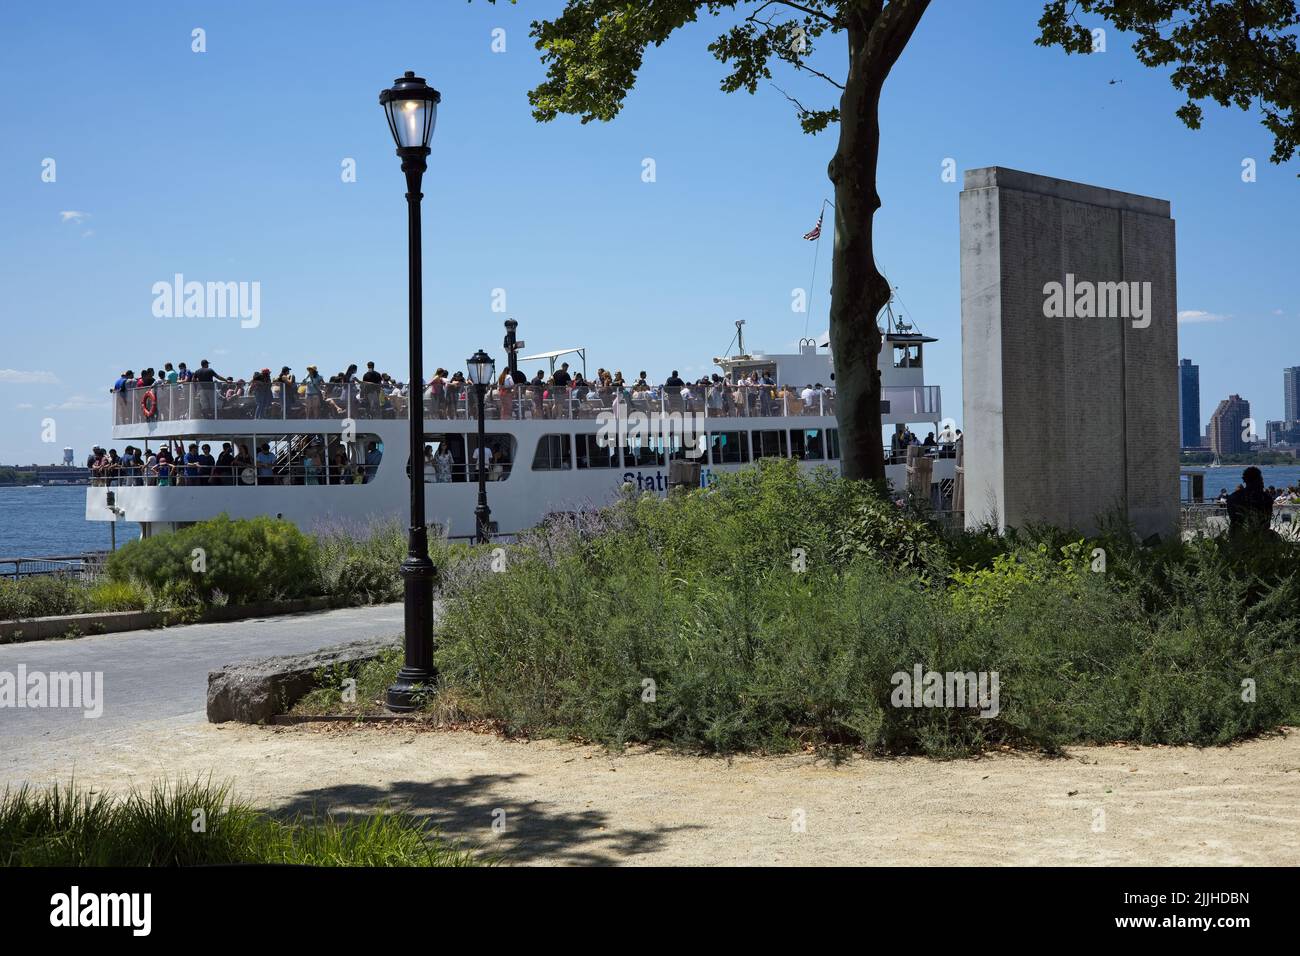 New York, NY, USA - July 25, 2022: View from Battery Park grounds towards the Hudson River with War Memorial in foreground and docking tourist boat in Stock Photo